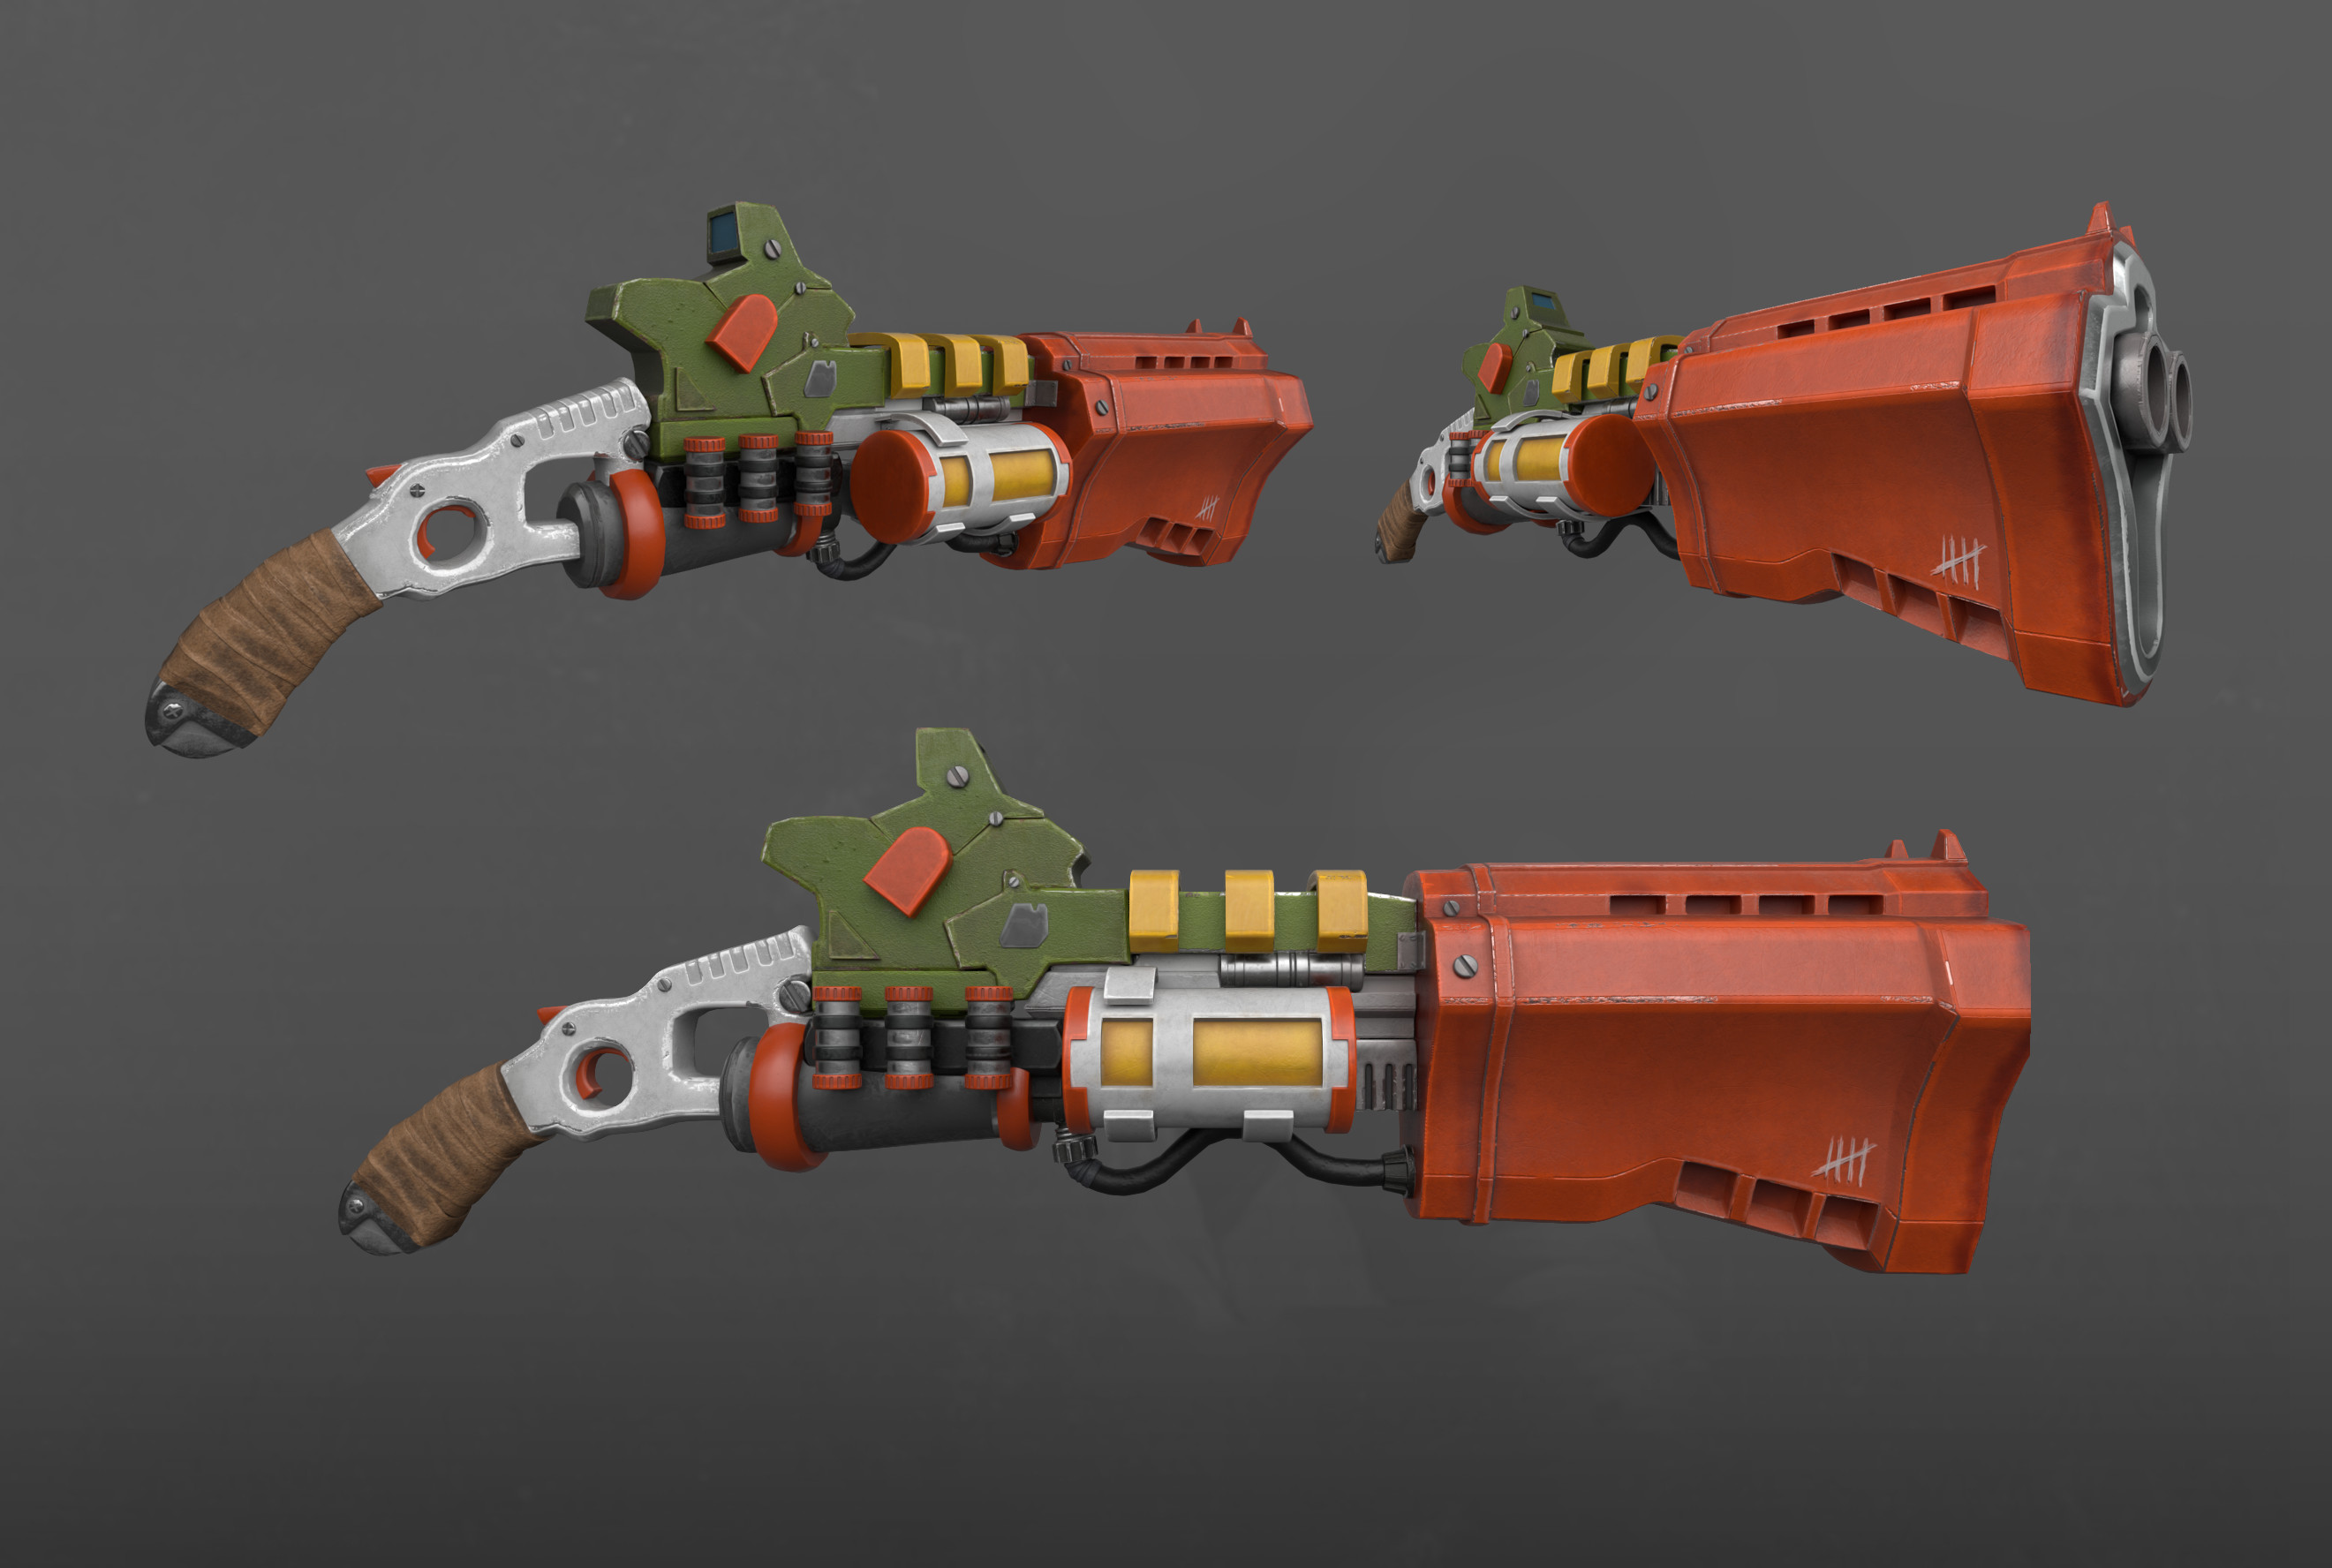 Substance Painter created gun. Loosely inspired by the work of the talented Sergey Vasnev
https://www.artstation.com/artwork/r98KL 